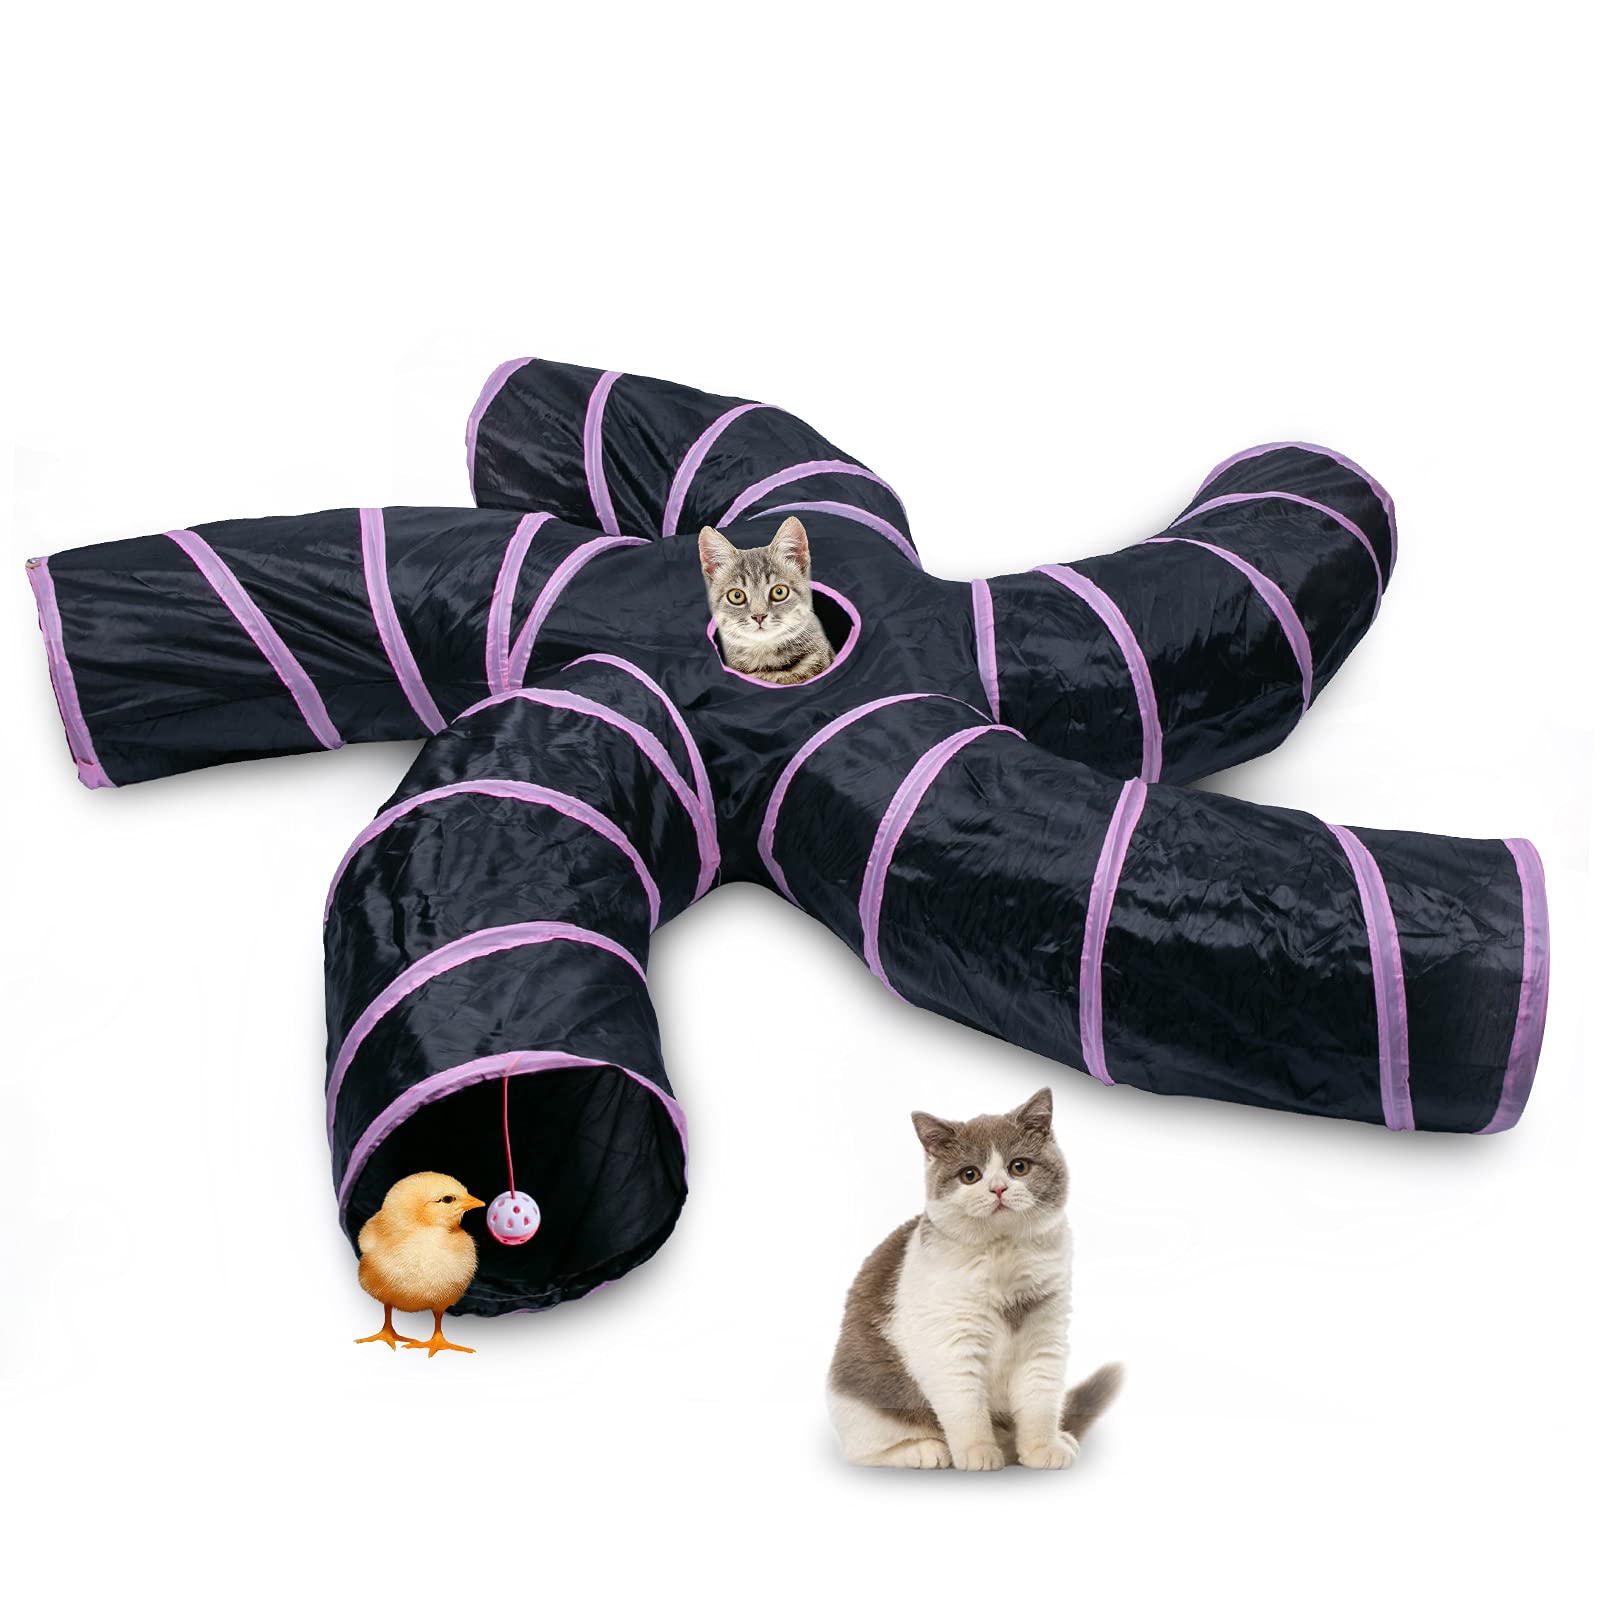 EgETOTA cat Tunnel for Indoor cats Large with Play Ball S-Shape 5 Way collapsible Interactive Peek Hole Pet Tube Toys Puppy Kitt